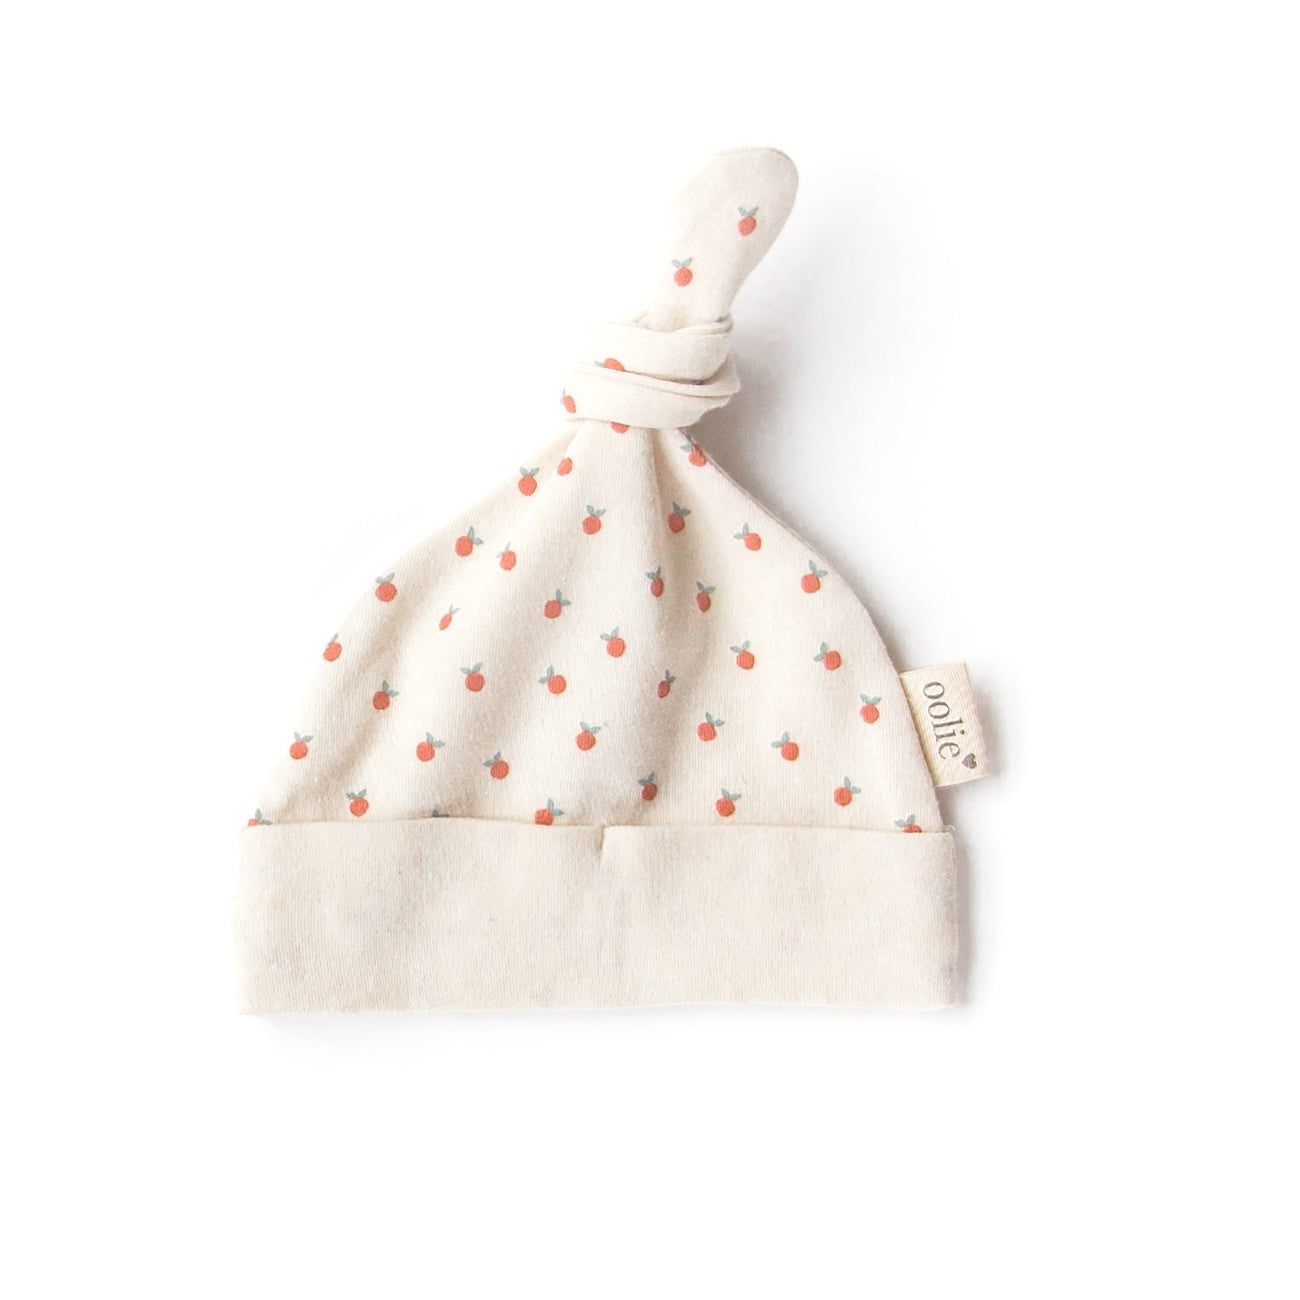 An Oolie organic cotton top knot baby hat with the little peach print, a natural color with tiny, irregular peaches in a repeating pattern.